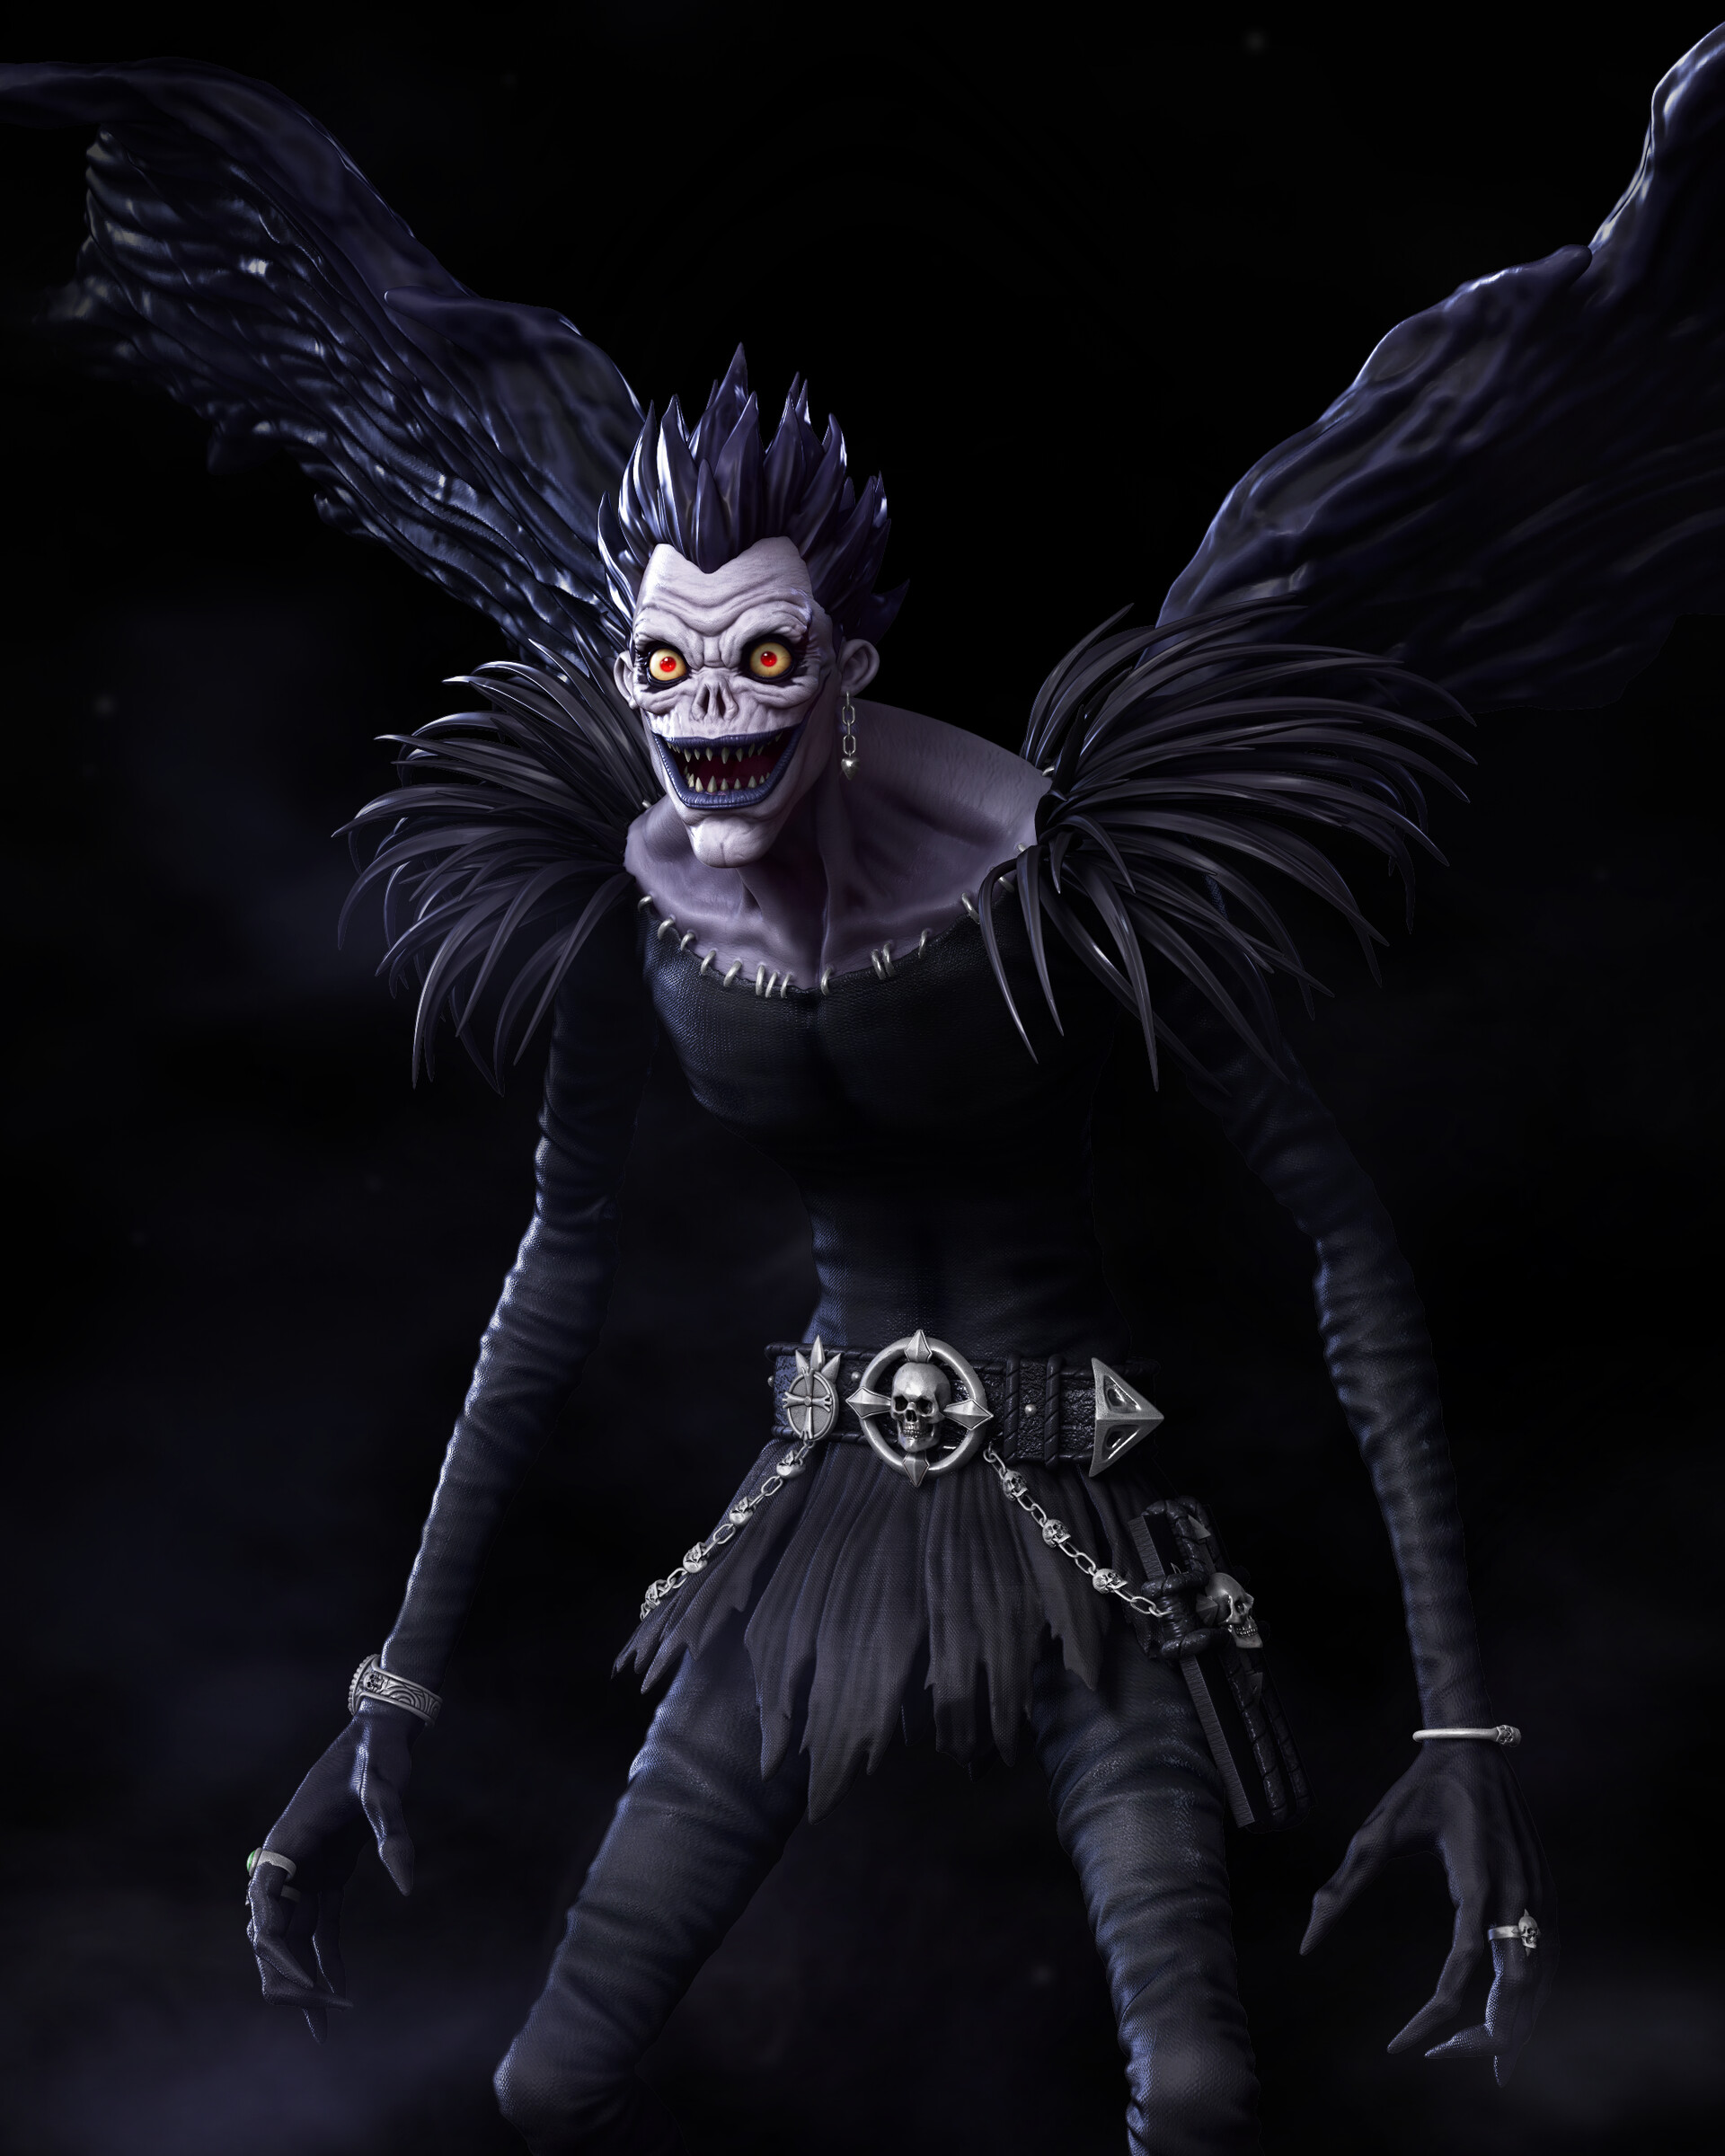 Death Note Ryuk character png